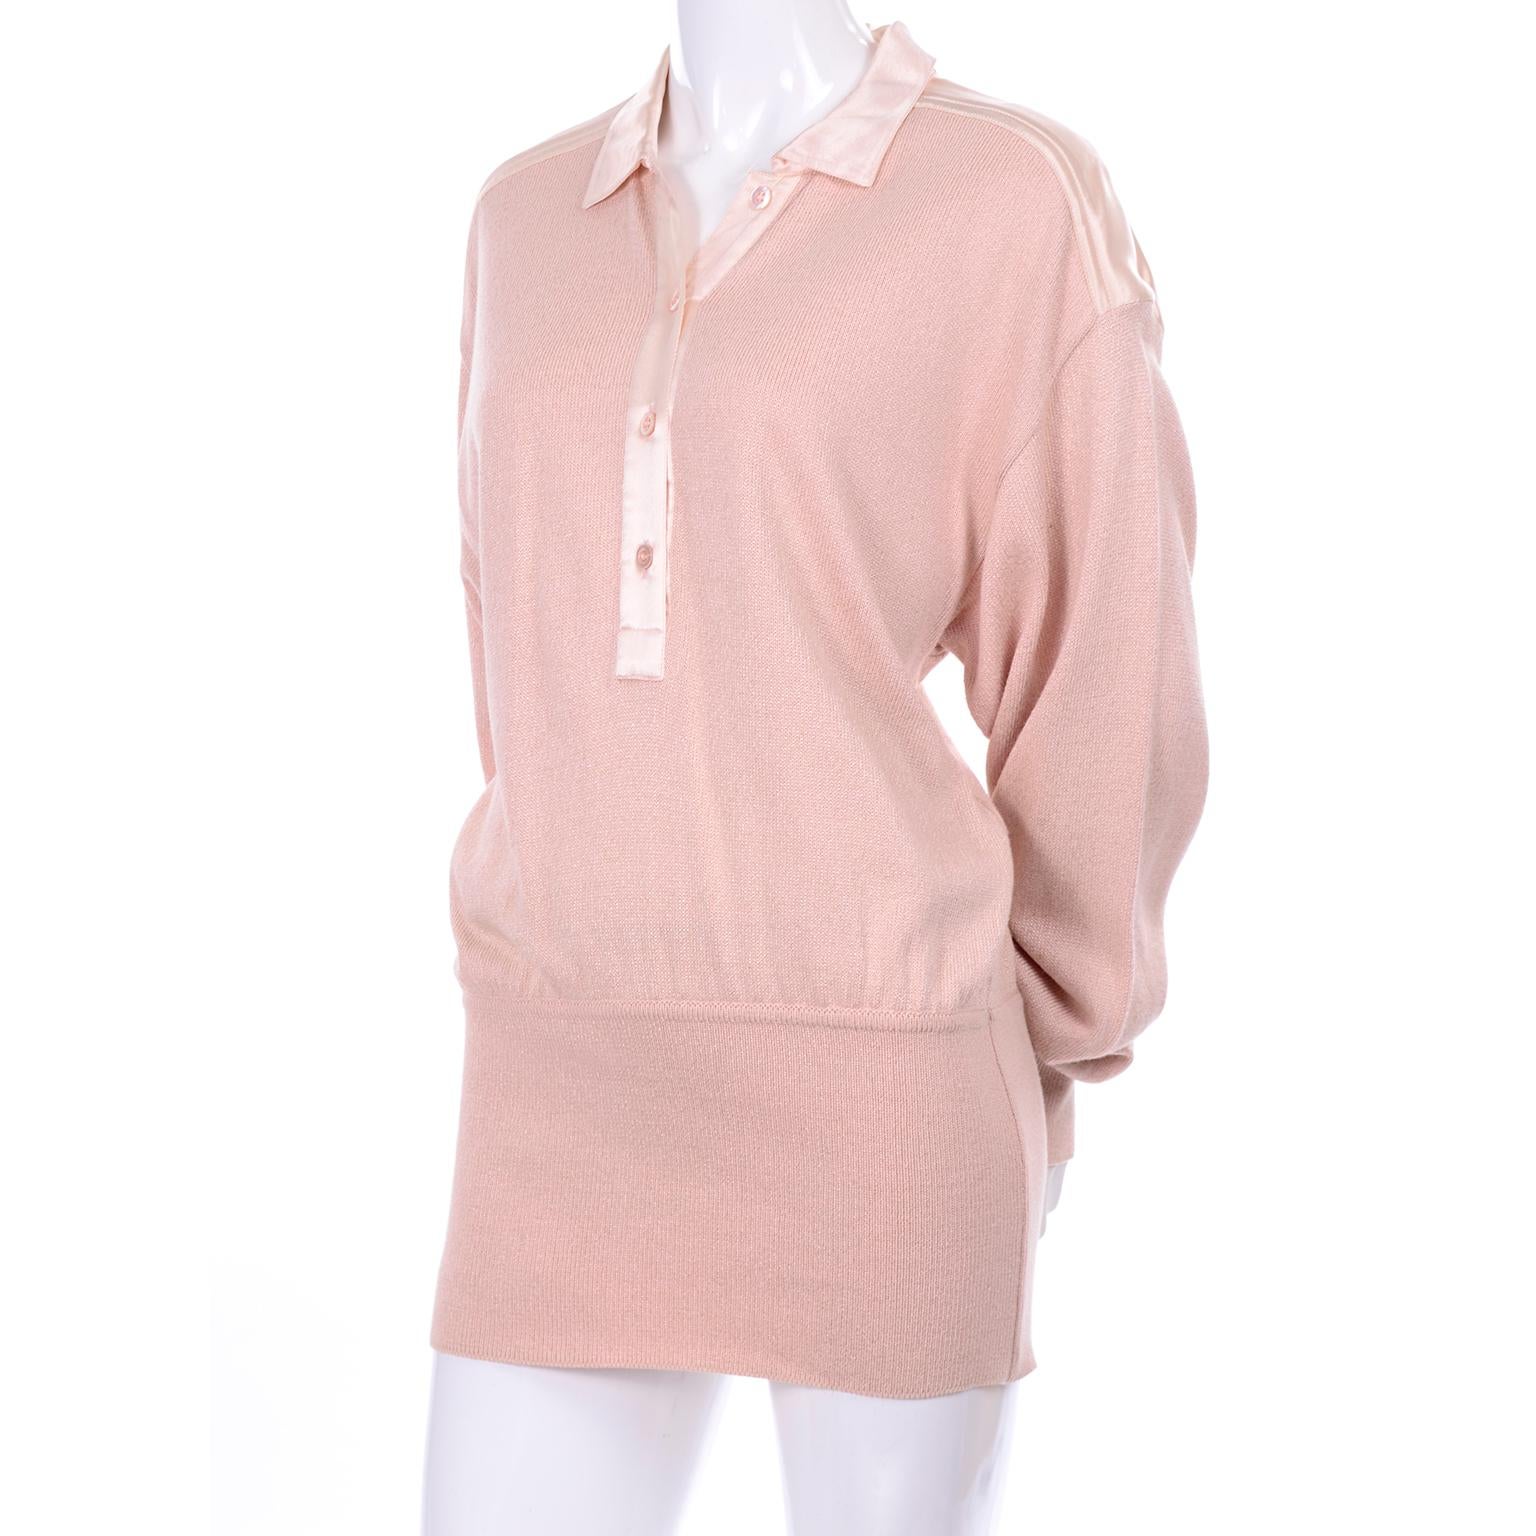 Escada pale peachy nude pink cotton/silk/rayon blend sweater with satin trim on the shoulders and collar. The top has buttons down the first half, with four buttons and has a thick elastic band around the hips or waist, depending on how you choose